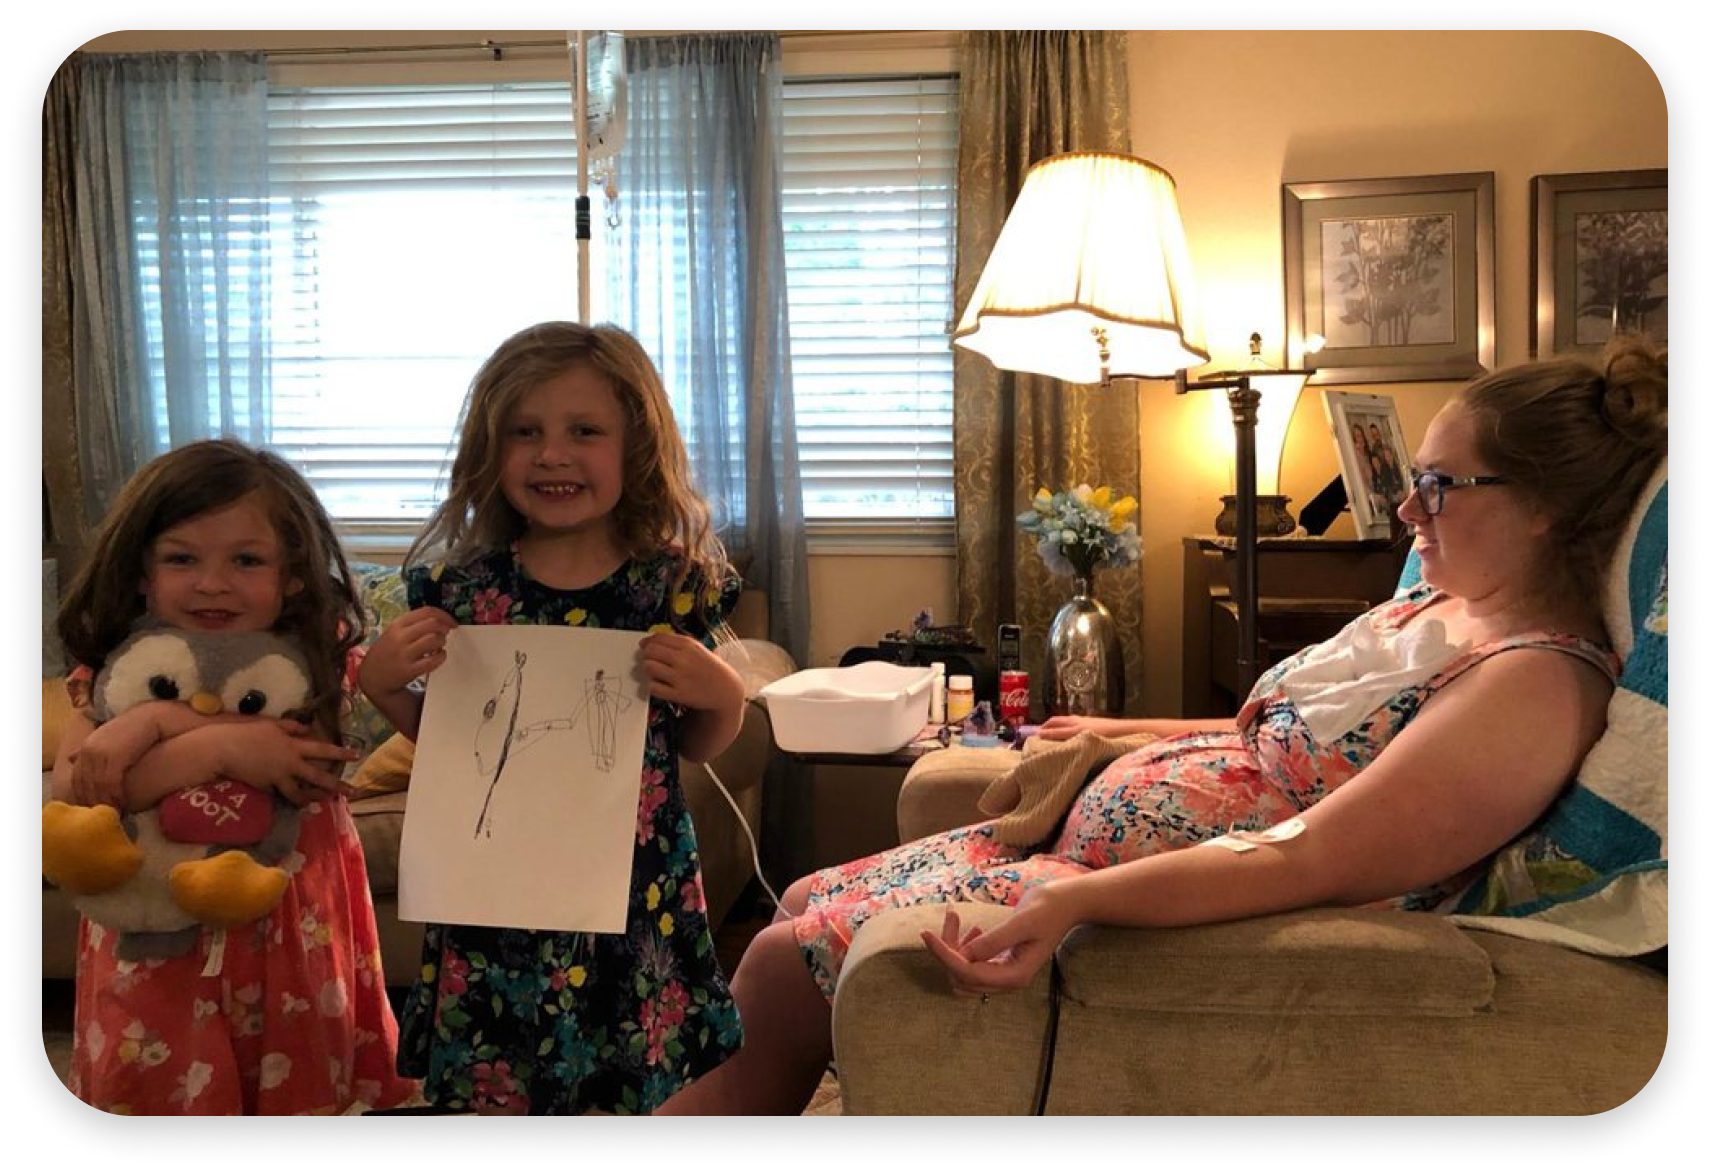 Two little girls are holding a drawing of a woman while a woman is sitting in a chair.